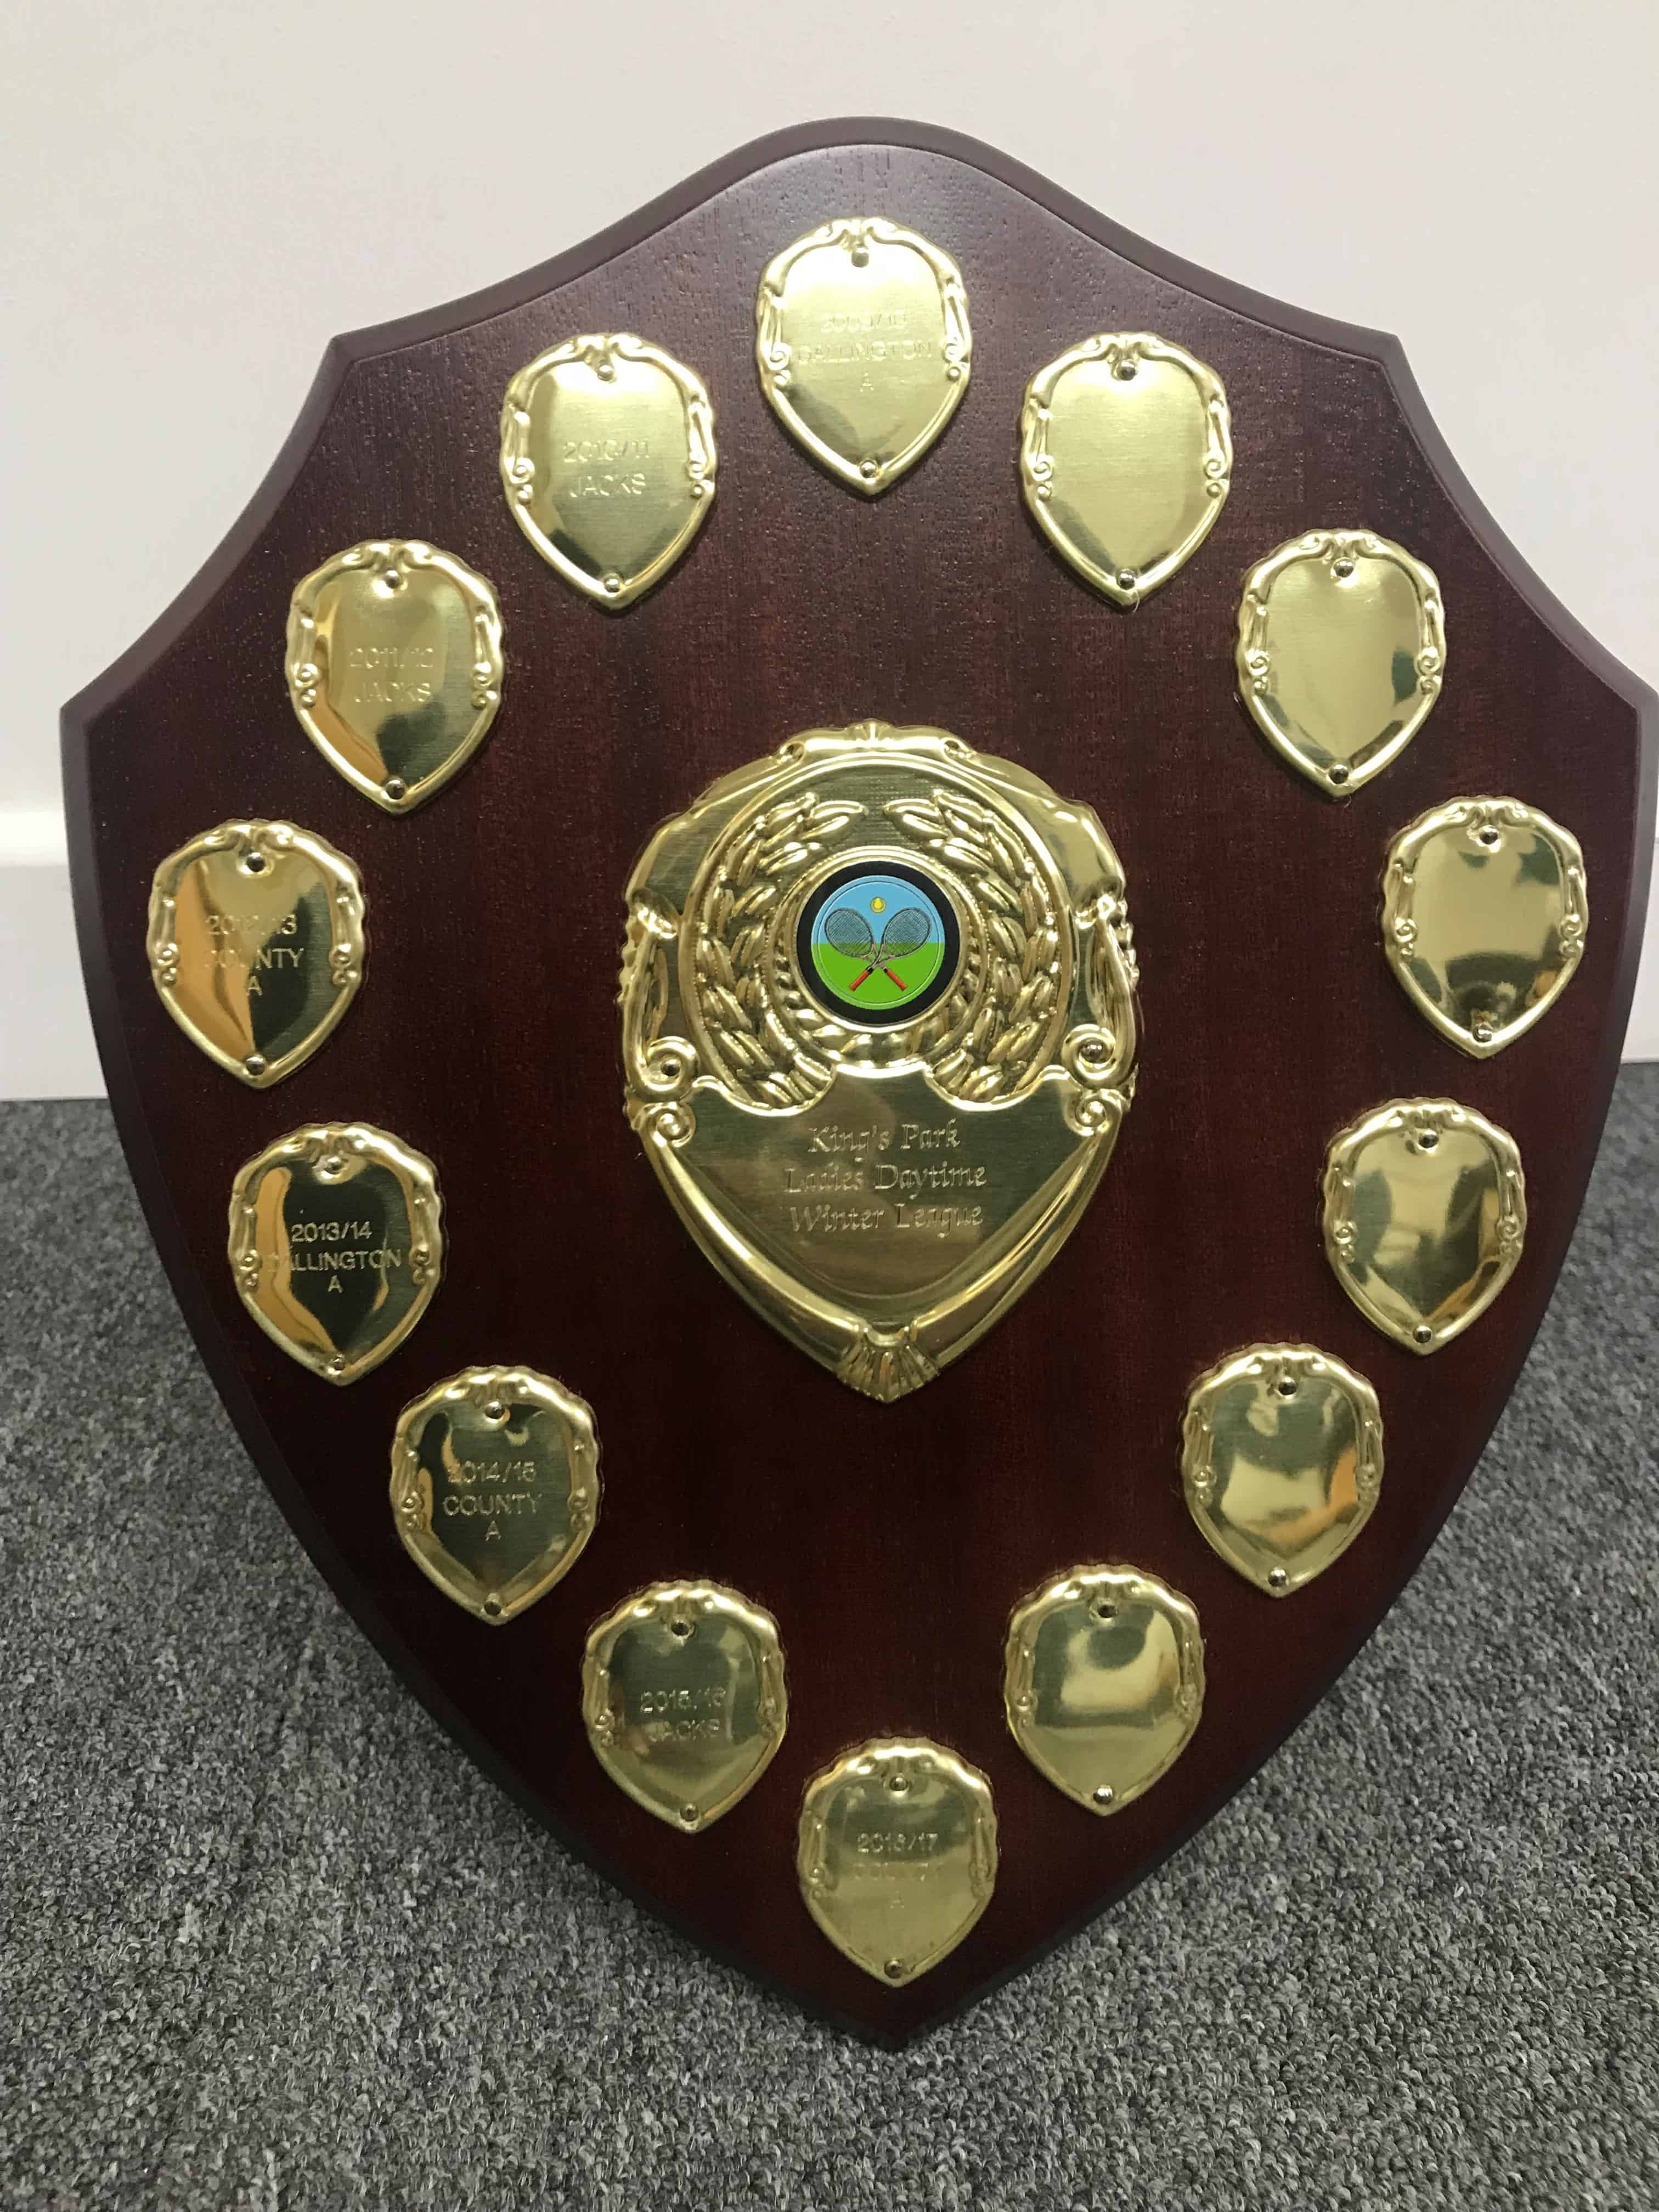 Supplying Awards and Shields as per requirement - Chemical Etching, Laser Engraving